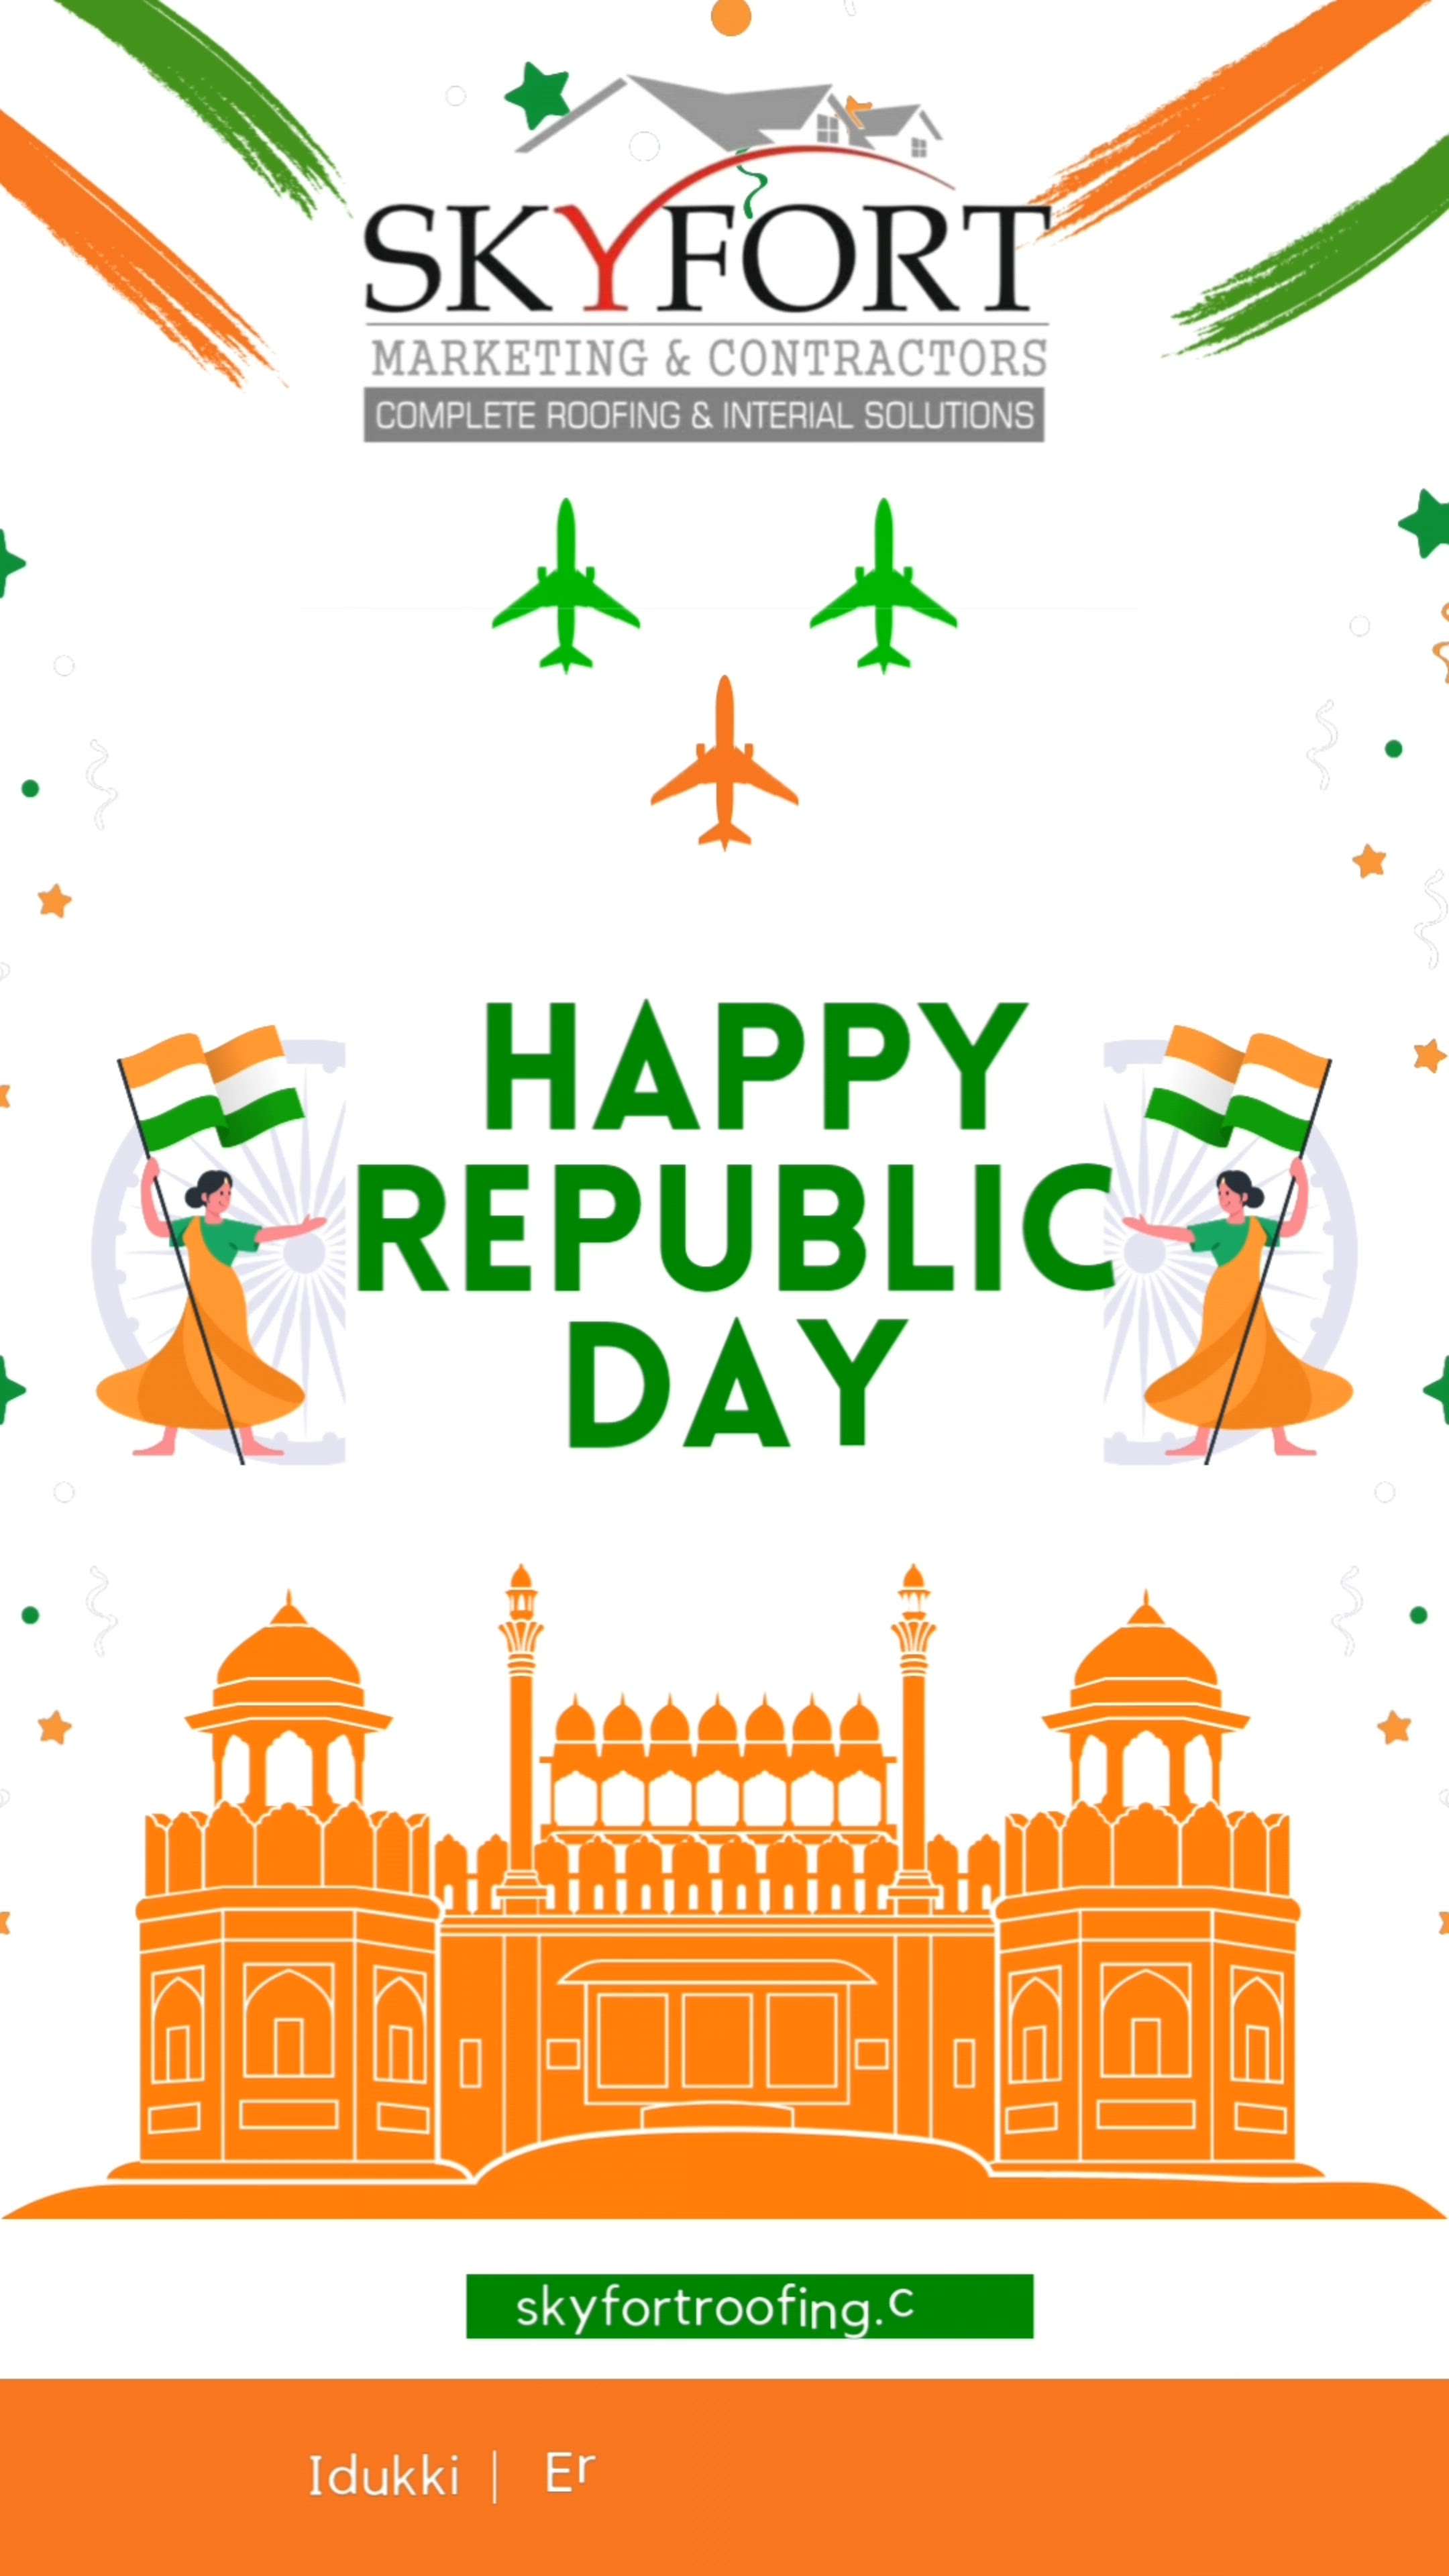 🇮🇳 HAPPY  REPUBLIC  Day 🇮🇳

Contact :-
@skyfortroofing

🌏 skyfortroofing.com

📞98471 90501

  94967 69501

  9072310416 (Office)

📩info@skyfortroofing.com

#roofing #rooftop #roofing contractor #roofingcompany #roofingservices #roofingsolutions #roofingkerala #ernakulam #kochi #perumbavoor #kerlaroof #keralaroofing #keralanewhome #newconstructionhomes #newconstruction #keralaconstruction #sky #Skyfort #skyfortroofing #allkerala #all #keraladelivery #alldelivery